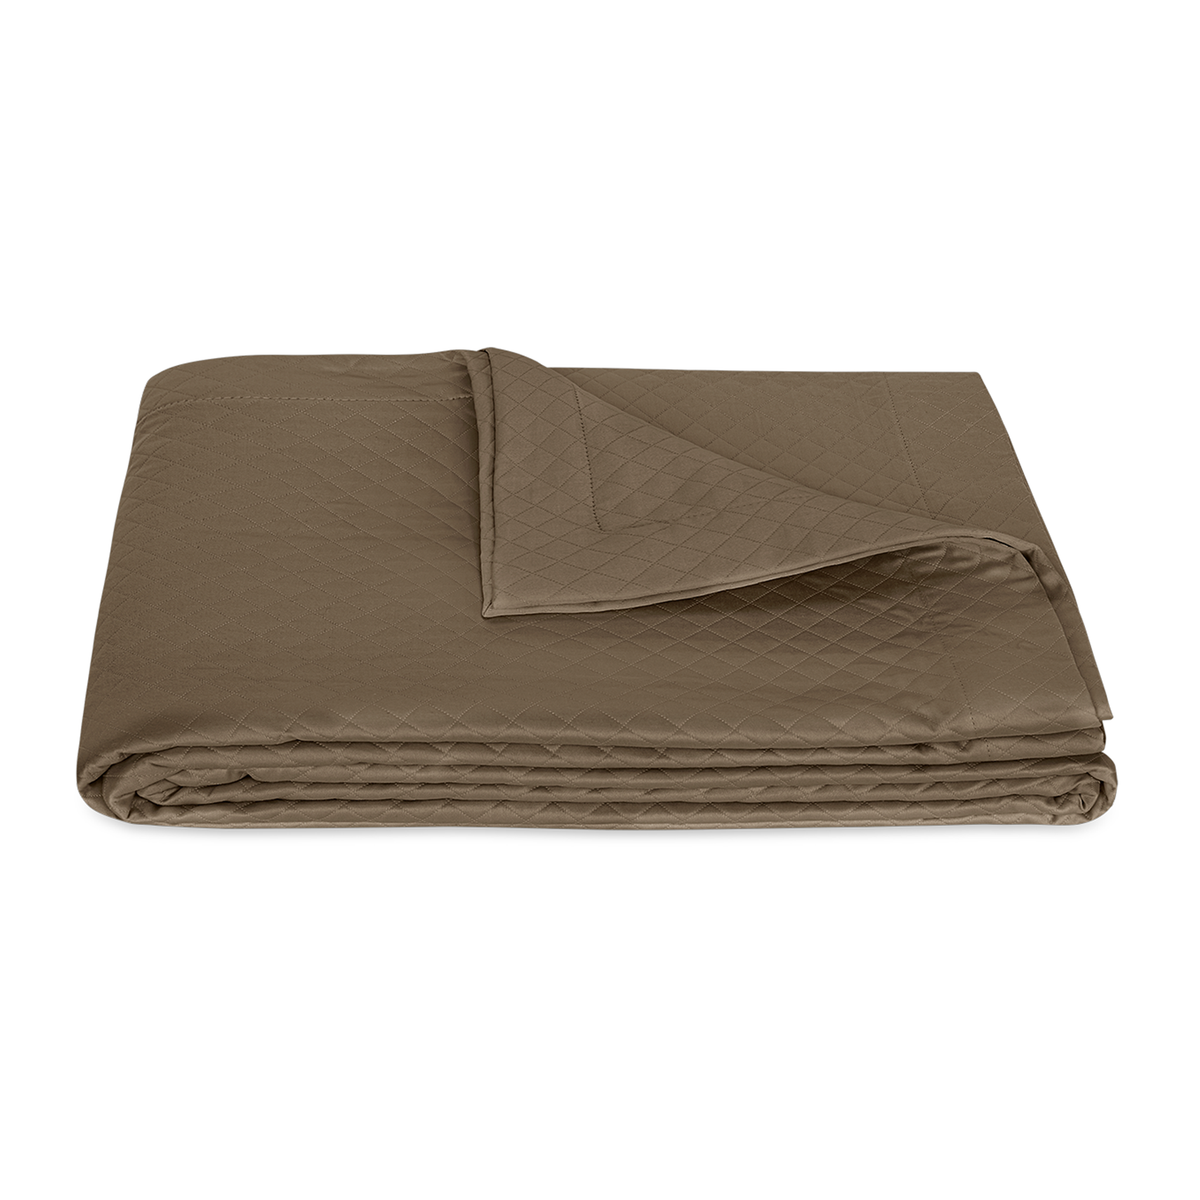 Folded Coverlet of Matouk Petra Bedding in Color Mocha